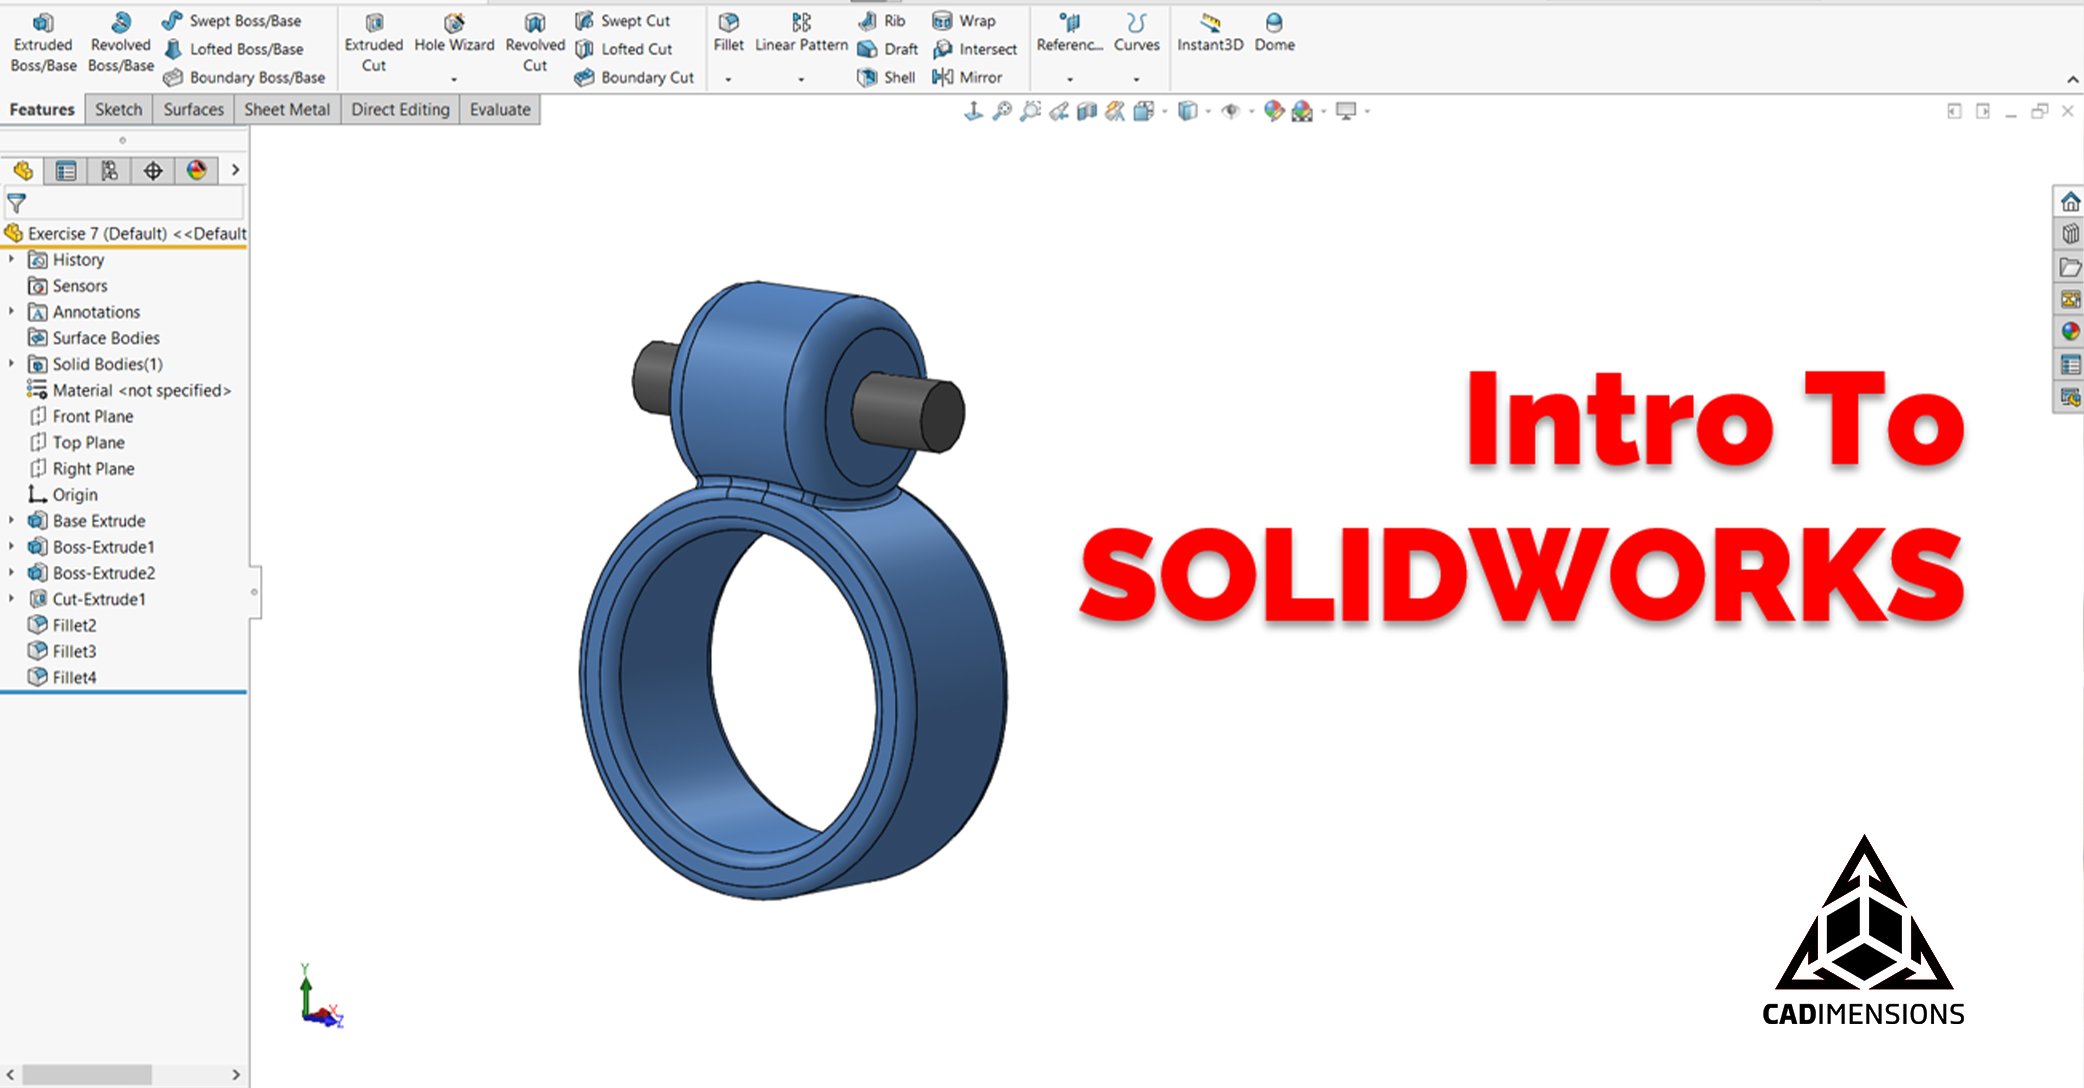 New Training Offering: Intro to SOLIDWORKS